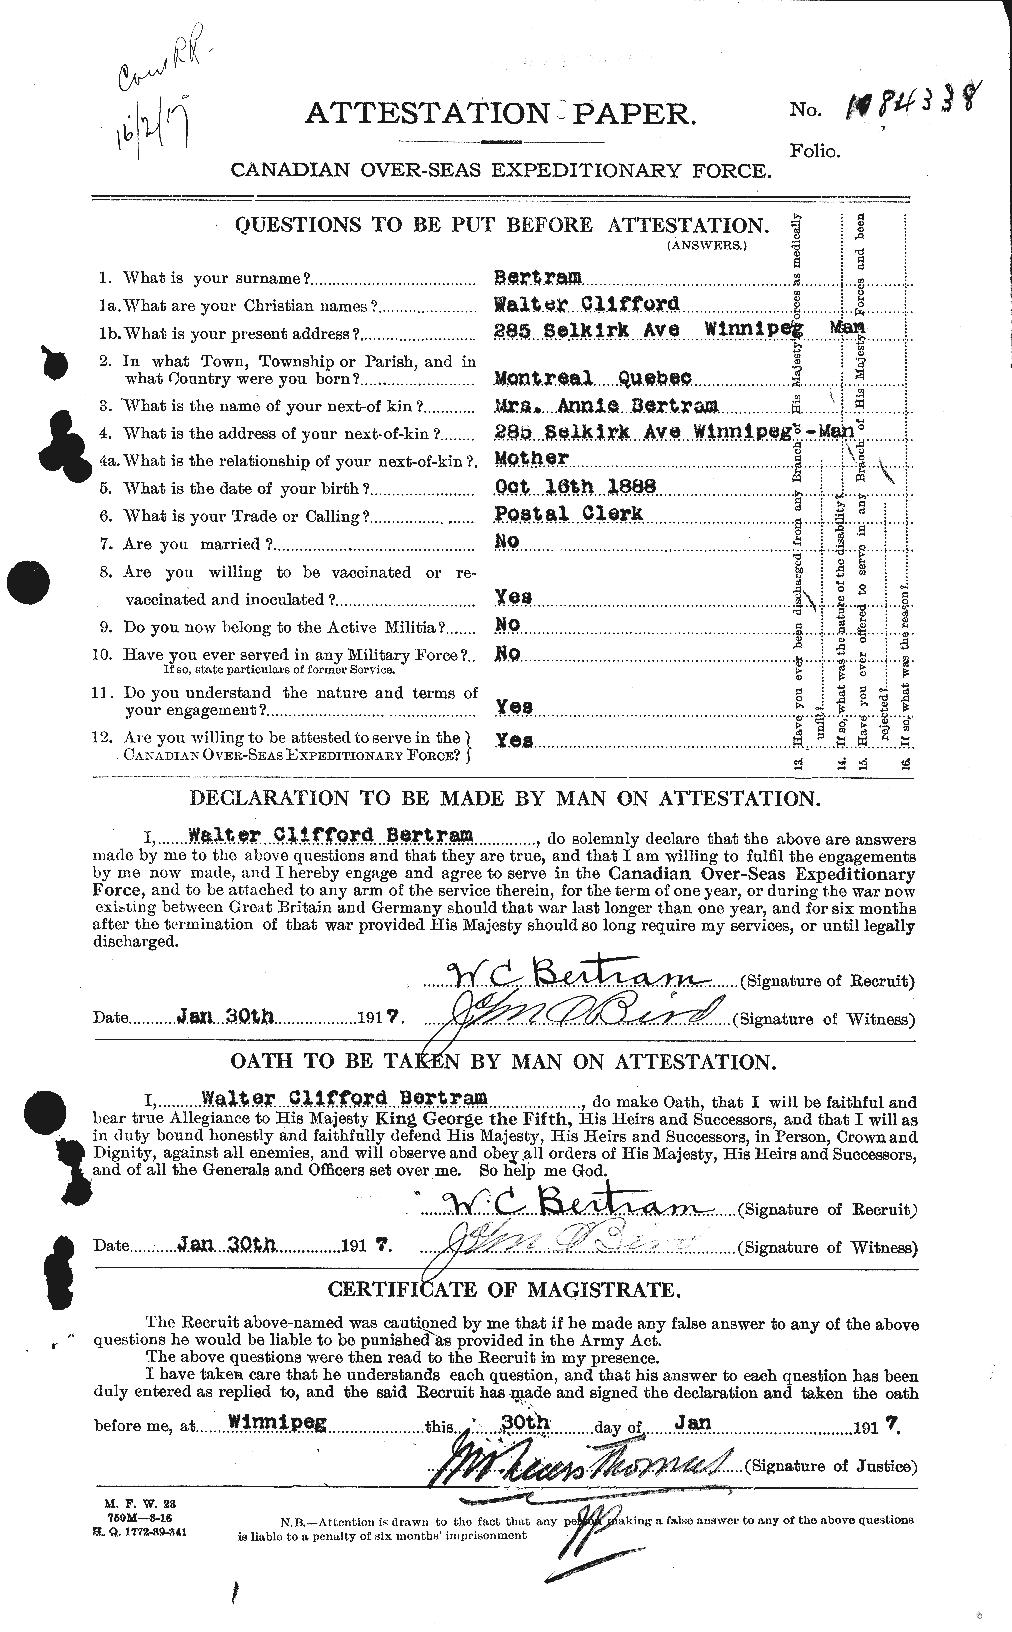 Personnel Records of the First World War - CEF 238694a